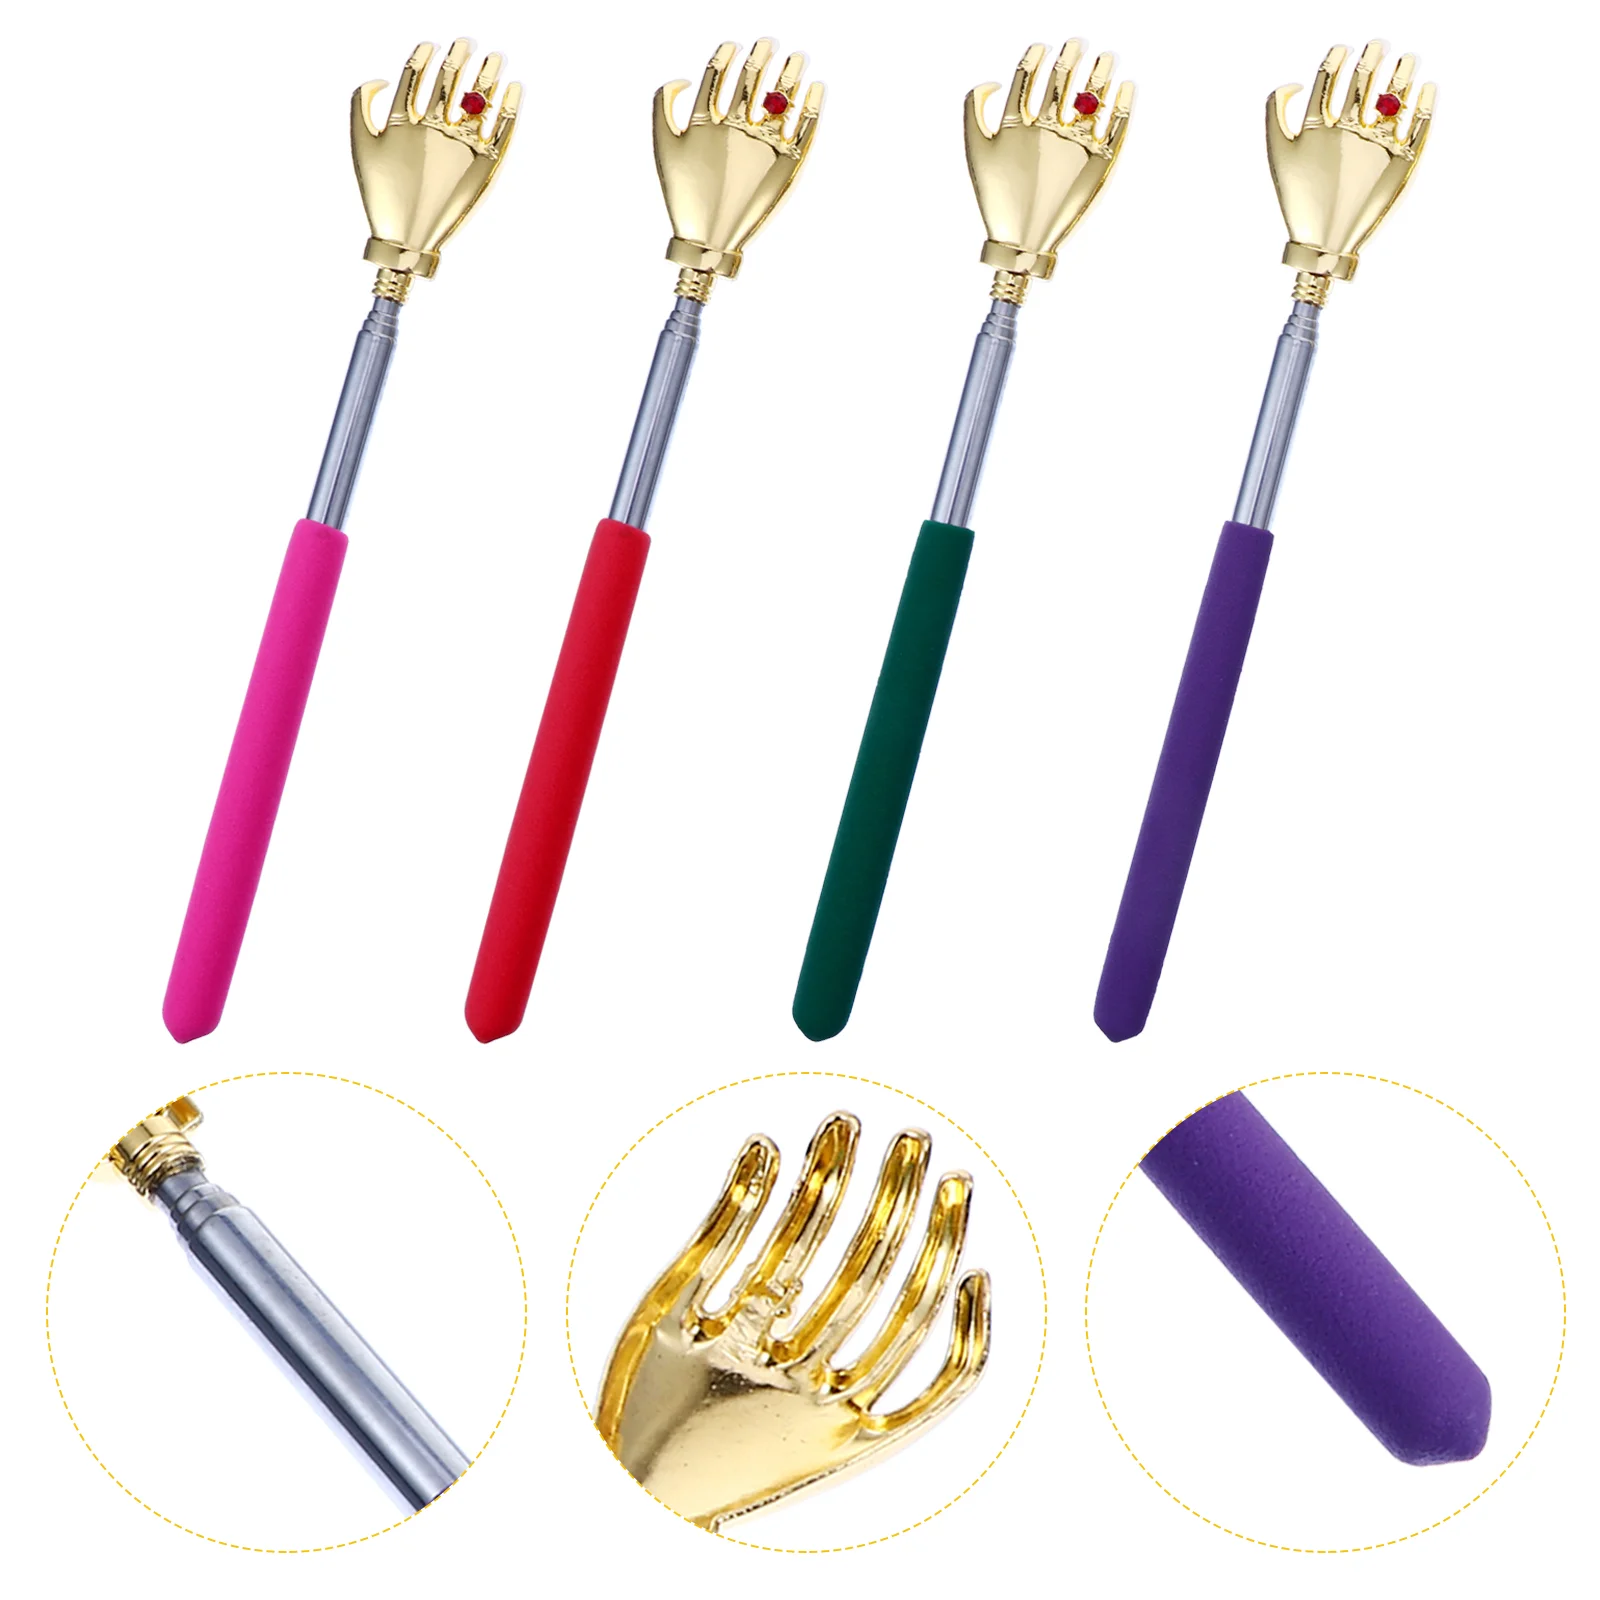 

Scratcher Back Scraper Scratching Stick Telescopic Metal Bear Claw Itching Device Retractable Handle Neck Massager